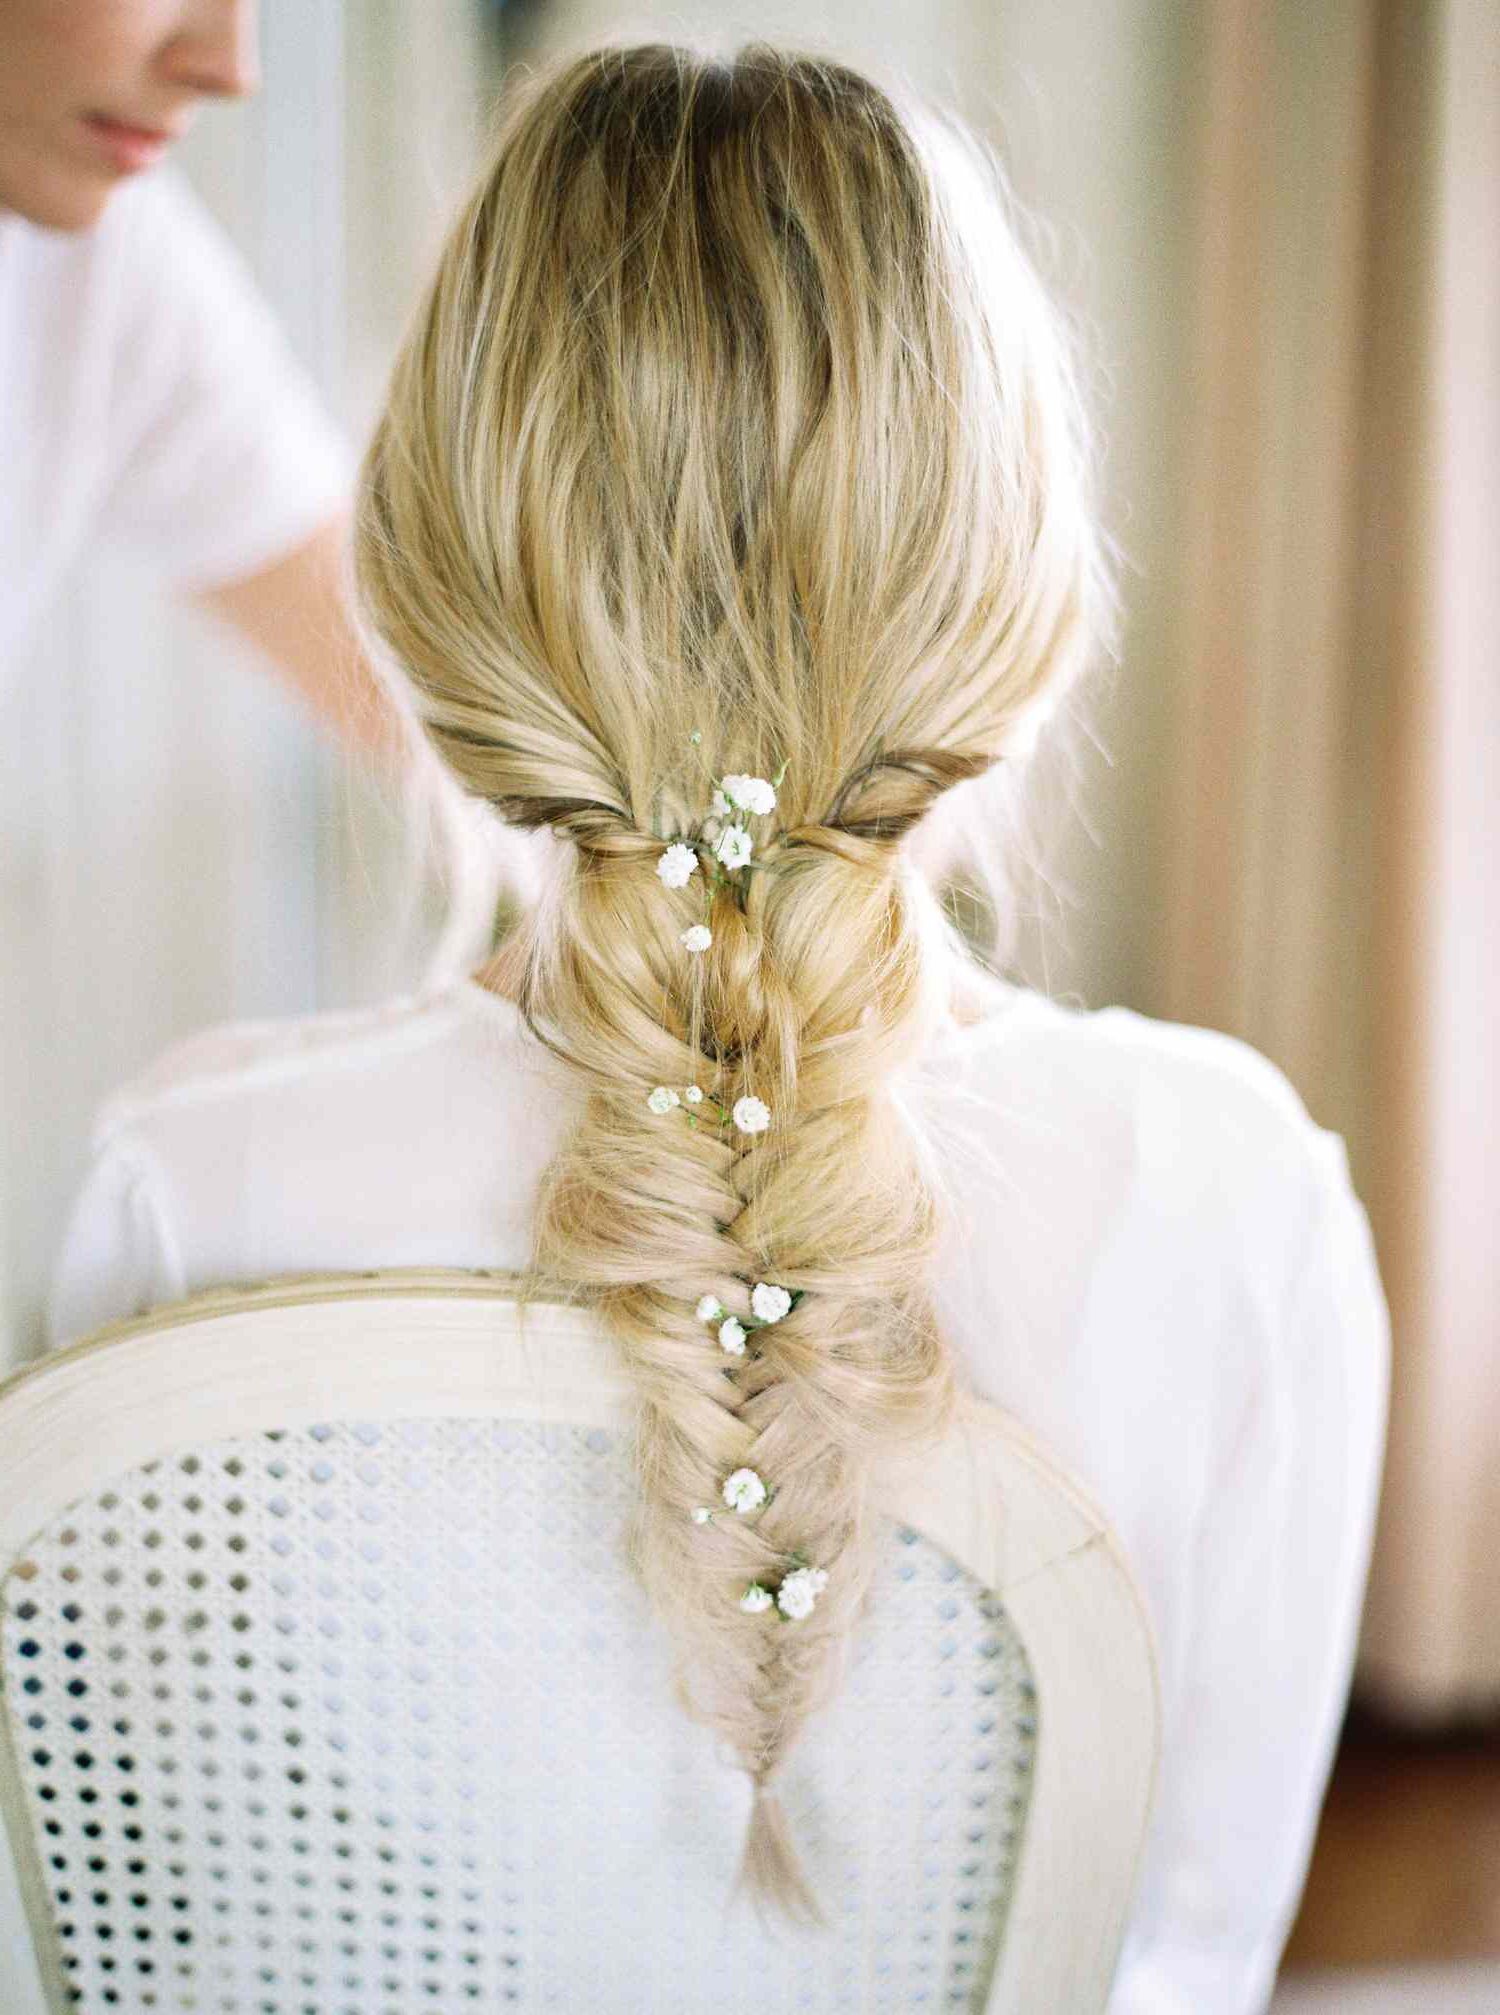 40 Stunning Braided Hairstyles We Love In Side Fishtail Braids For A Low Twist (View 22 of 25)